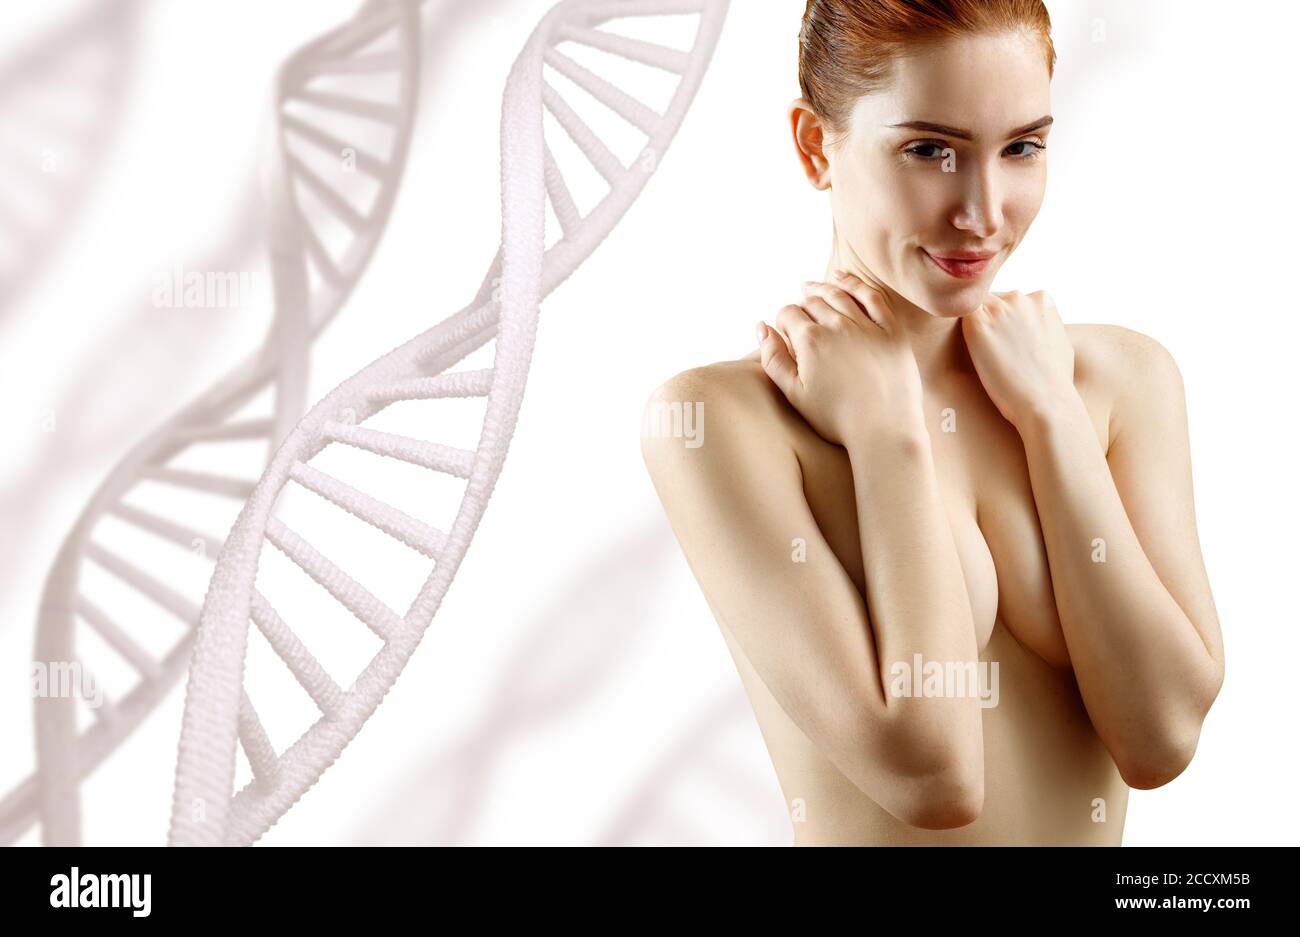 Young woman covering breast by hands among DNA stems. Stock Photo